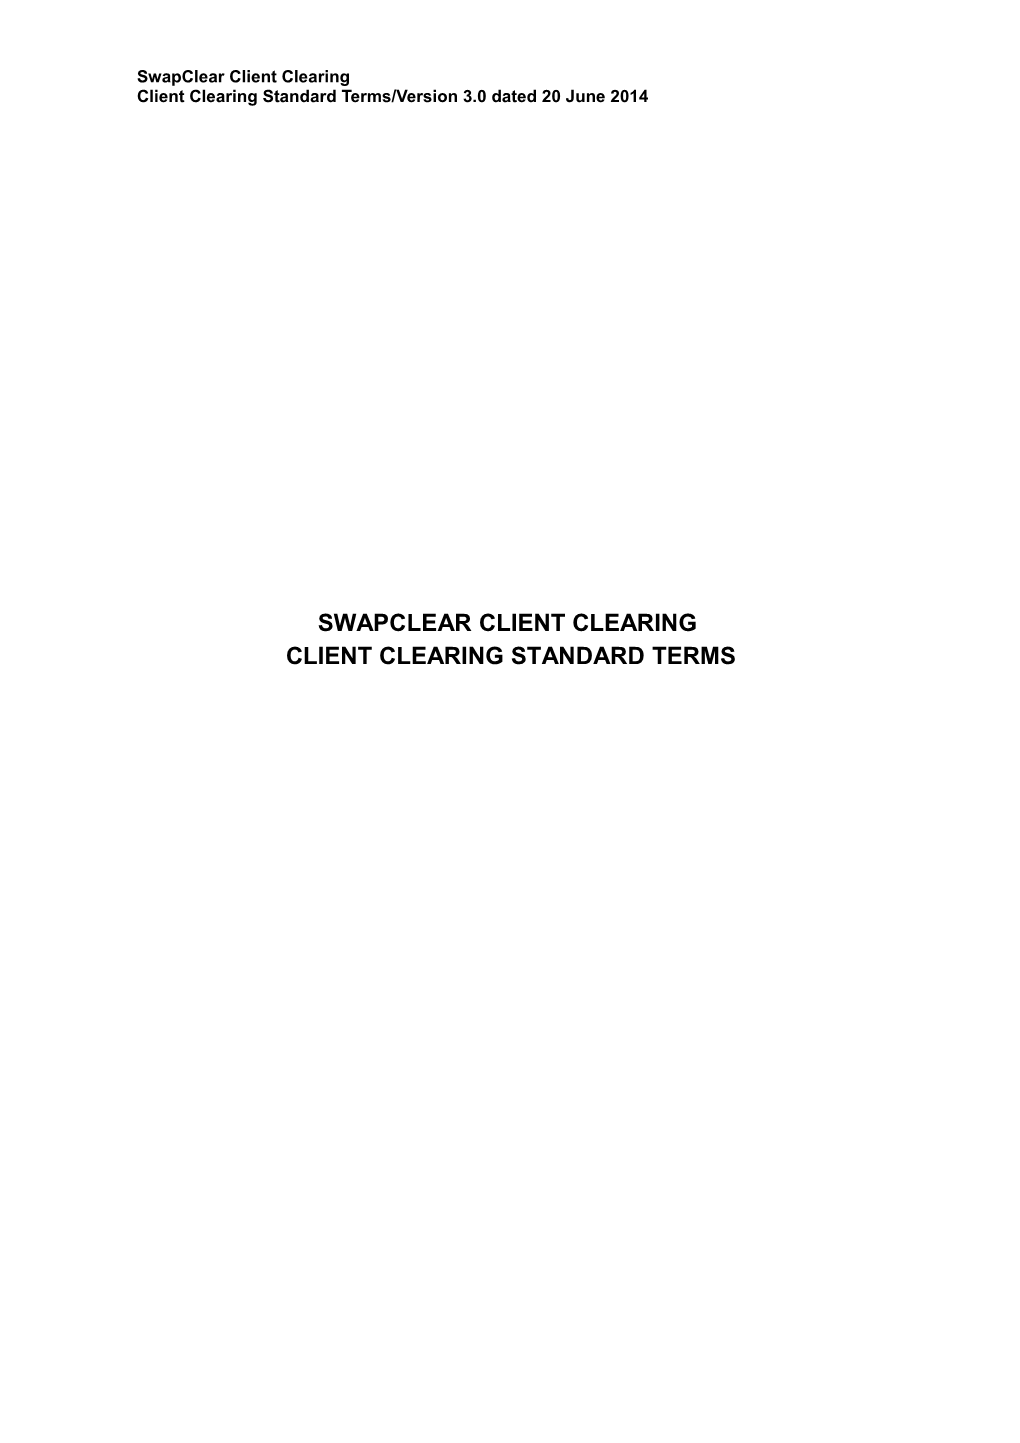 Swapclear Client Clearing